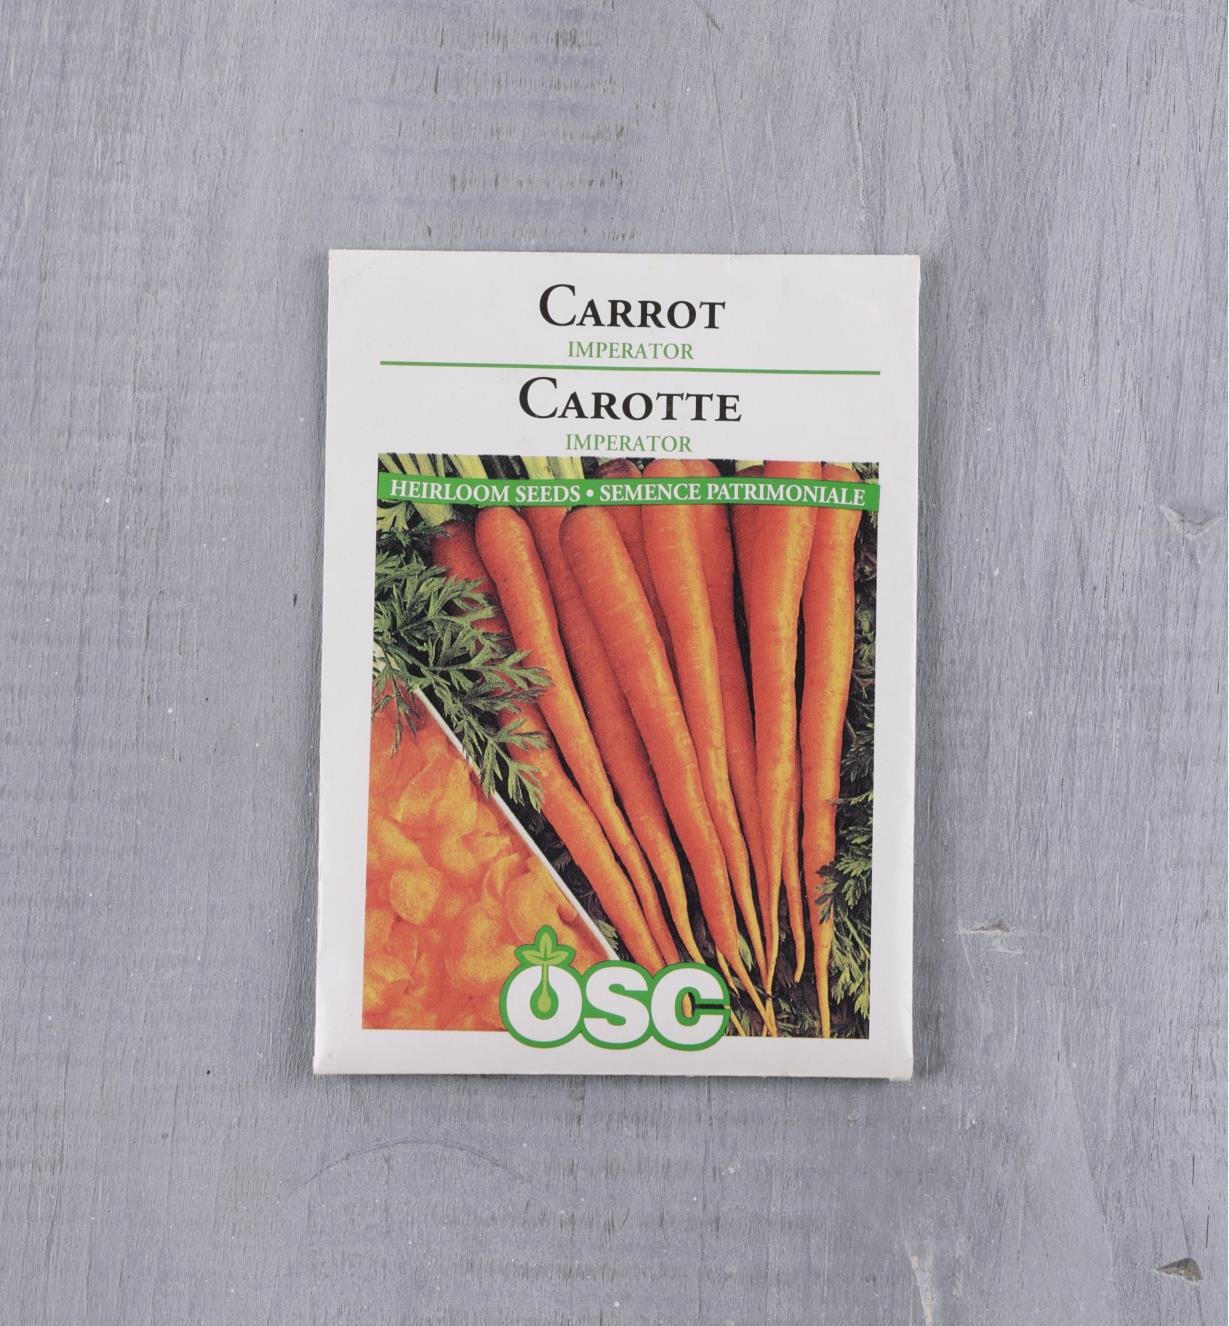 SD108 - Carrots, Imperator